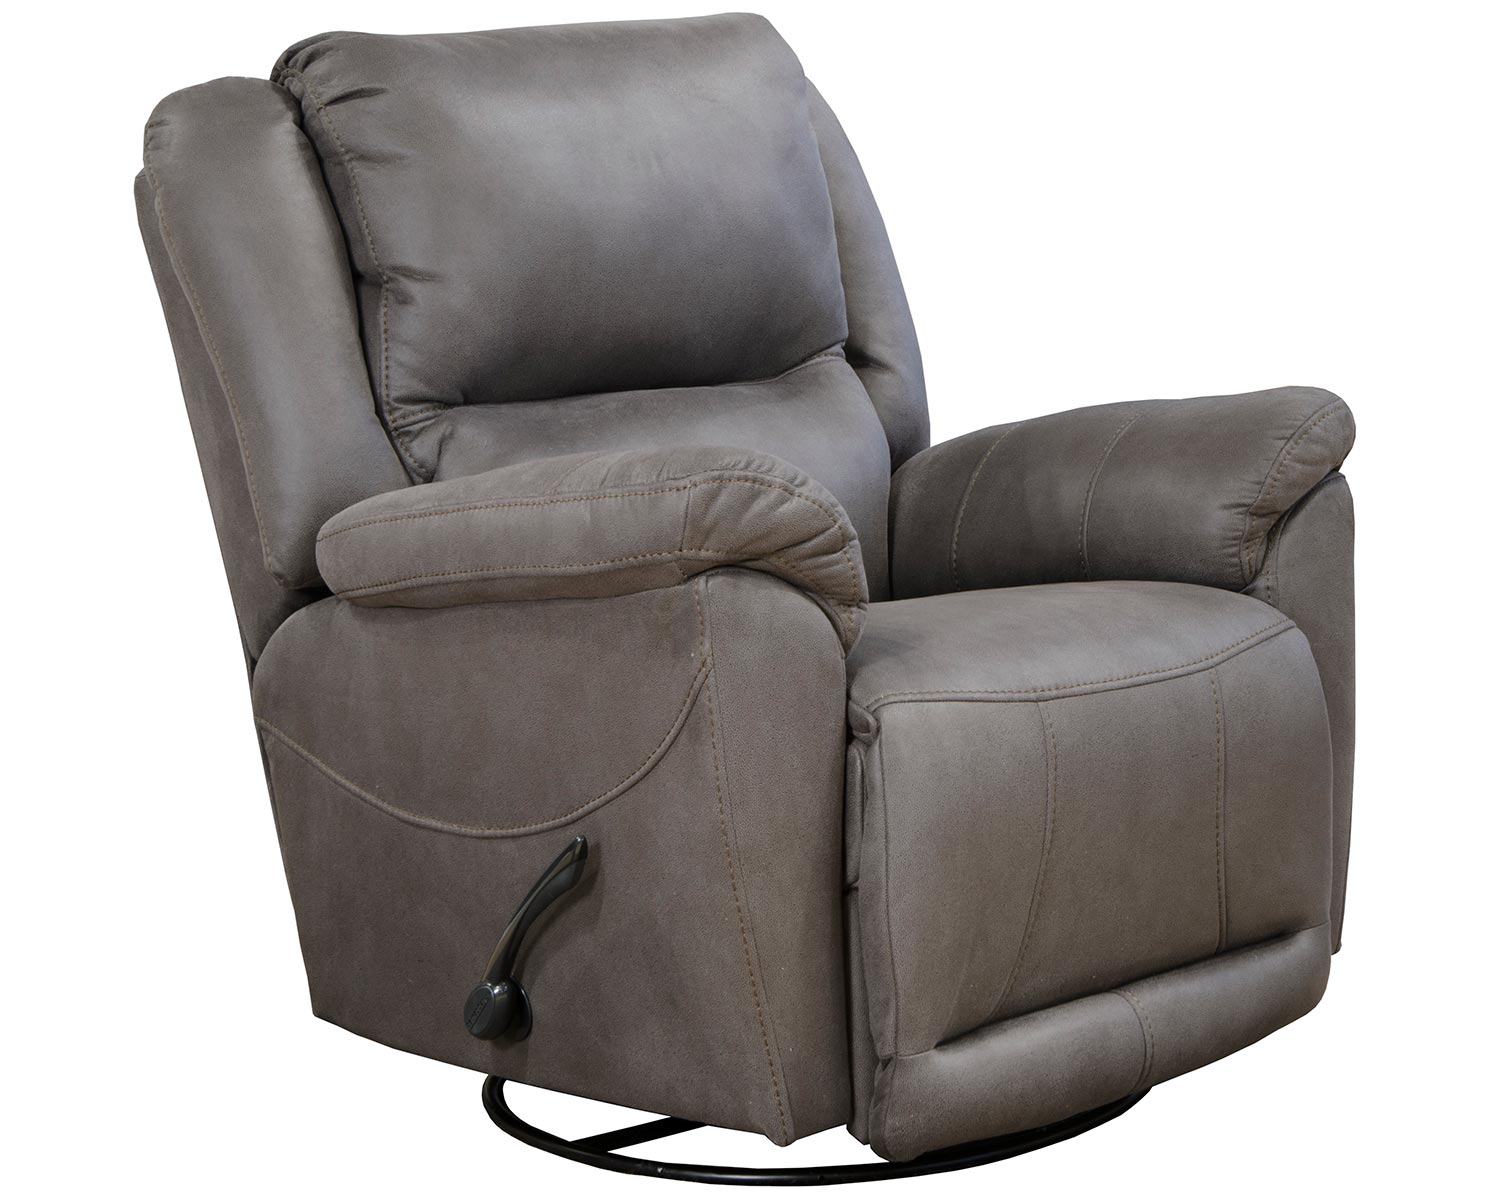 CatNapper Cole Recliner Chair - Charcoal